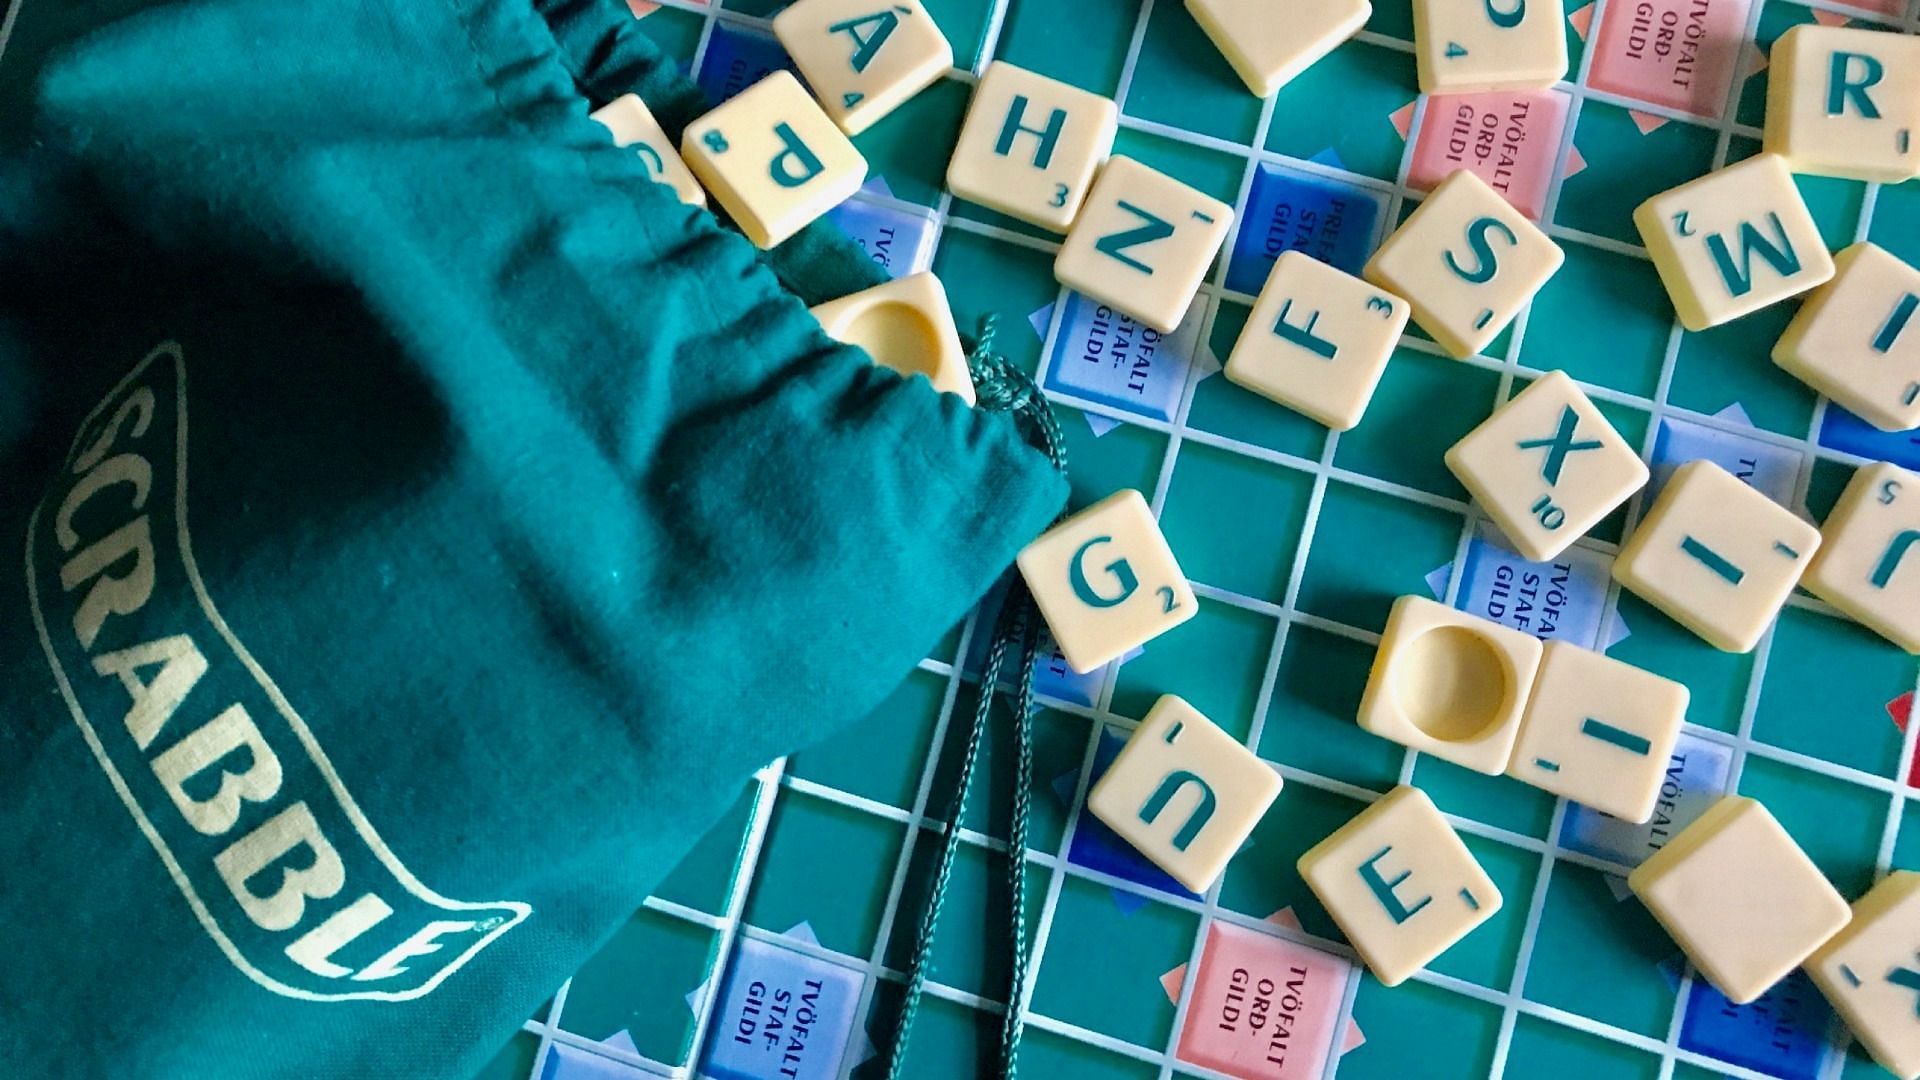 All scrabble word